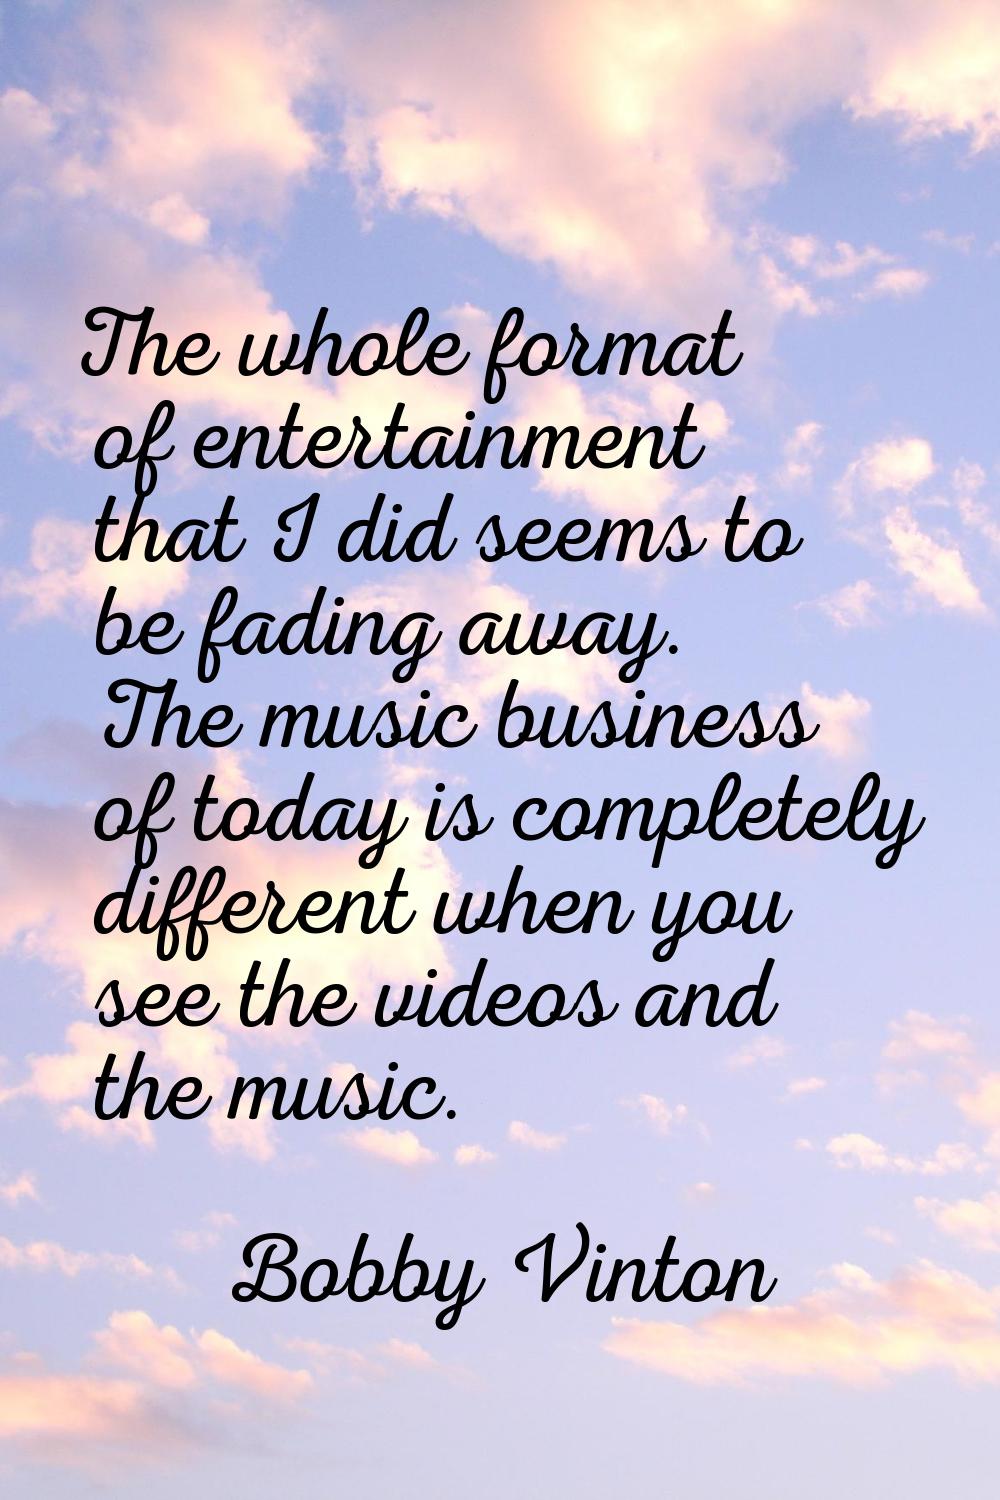 The whole format of entertainment that I did seems to be fading away. The music business of today i